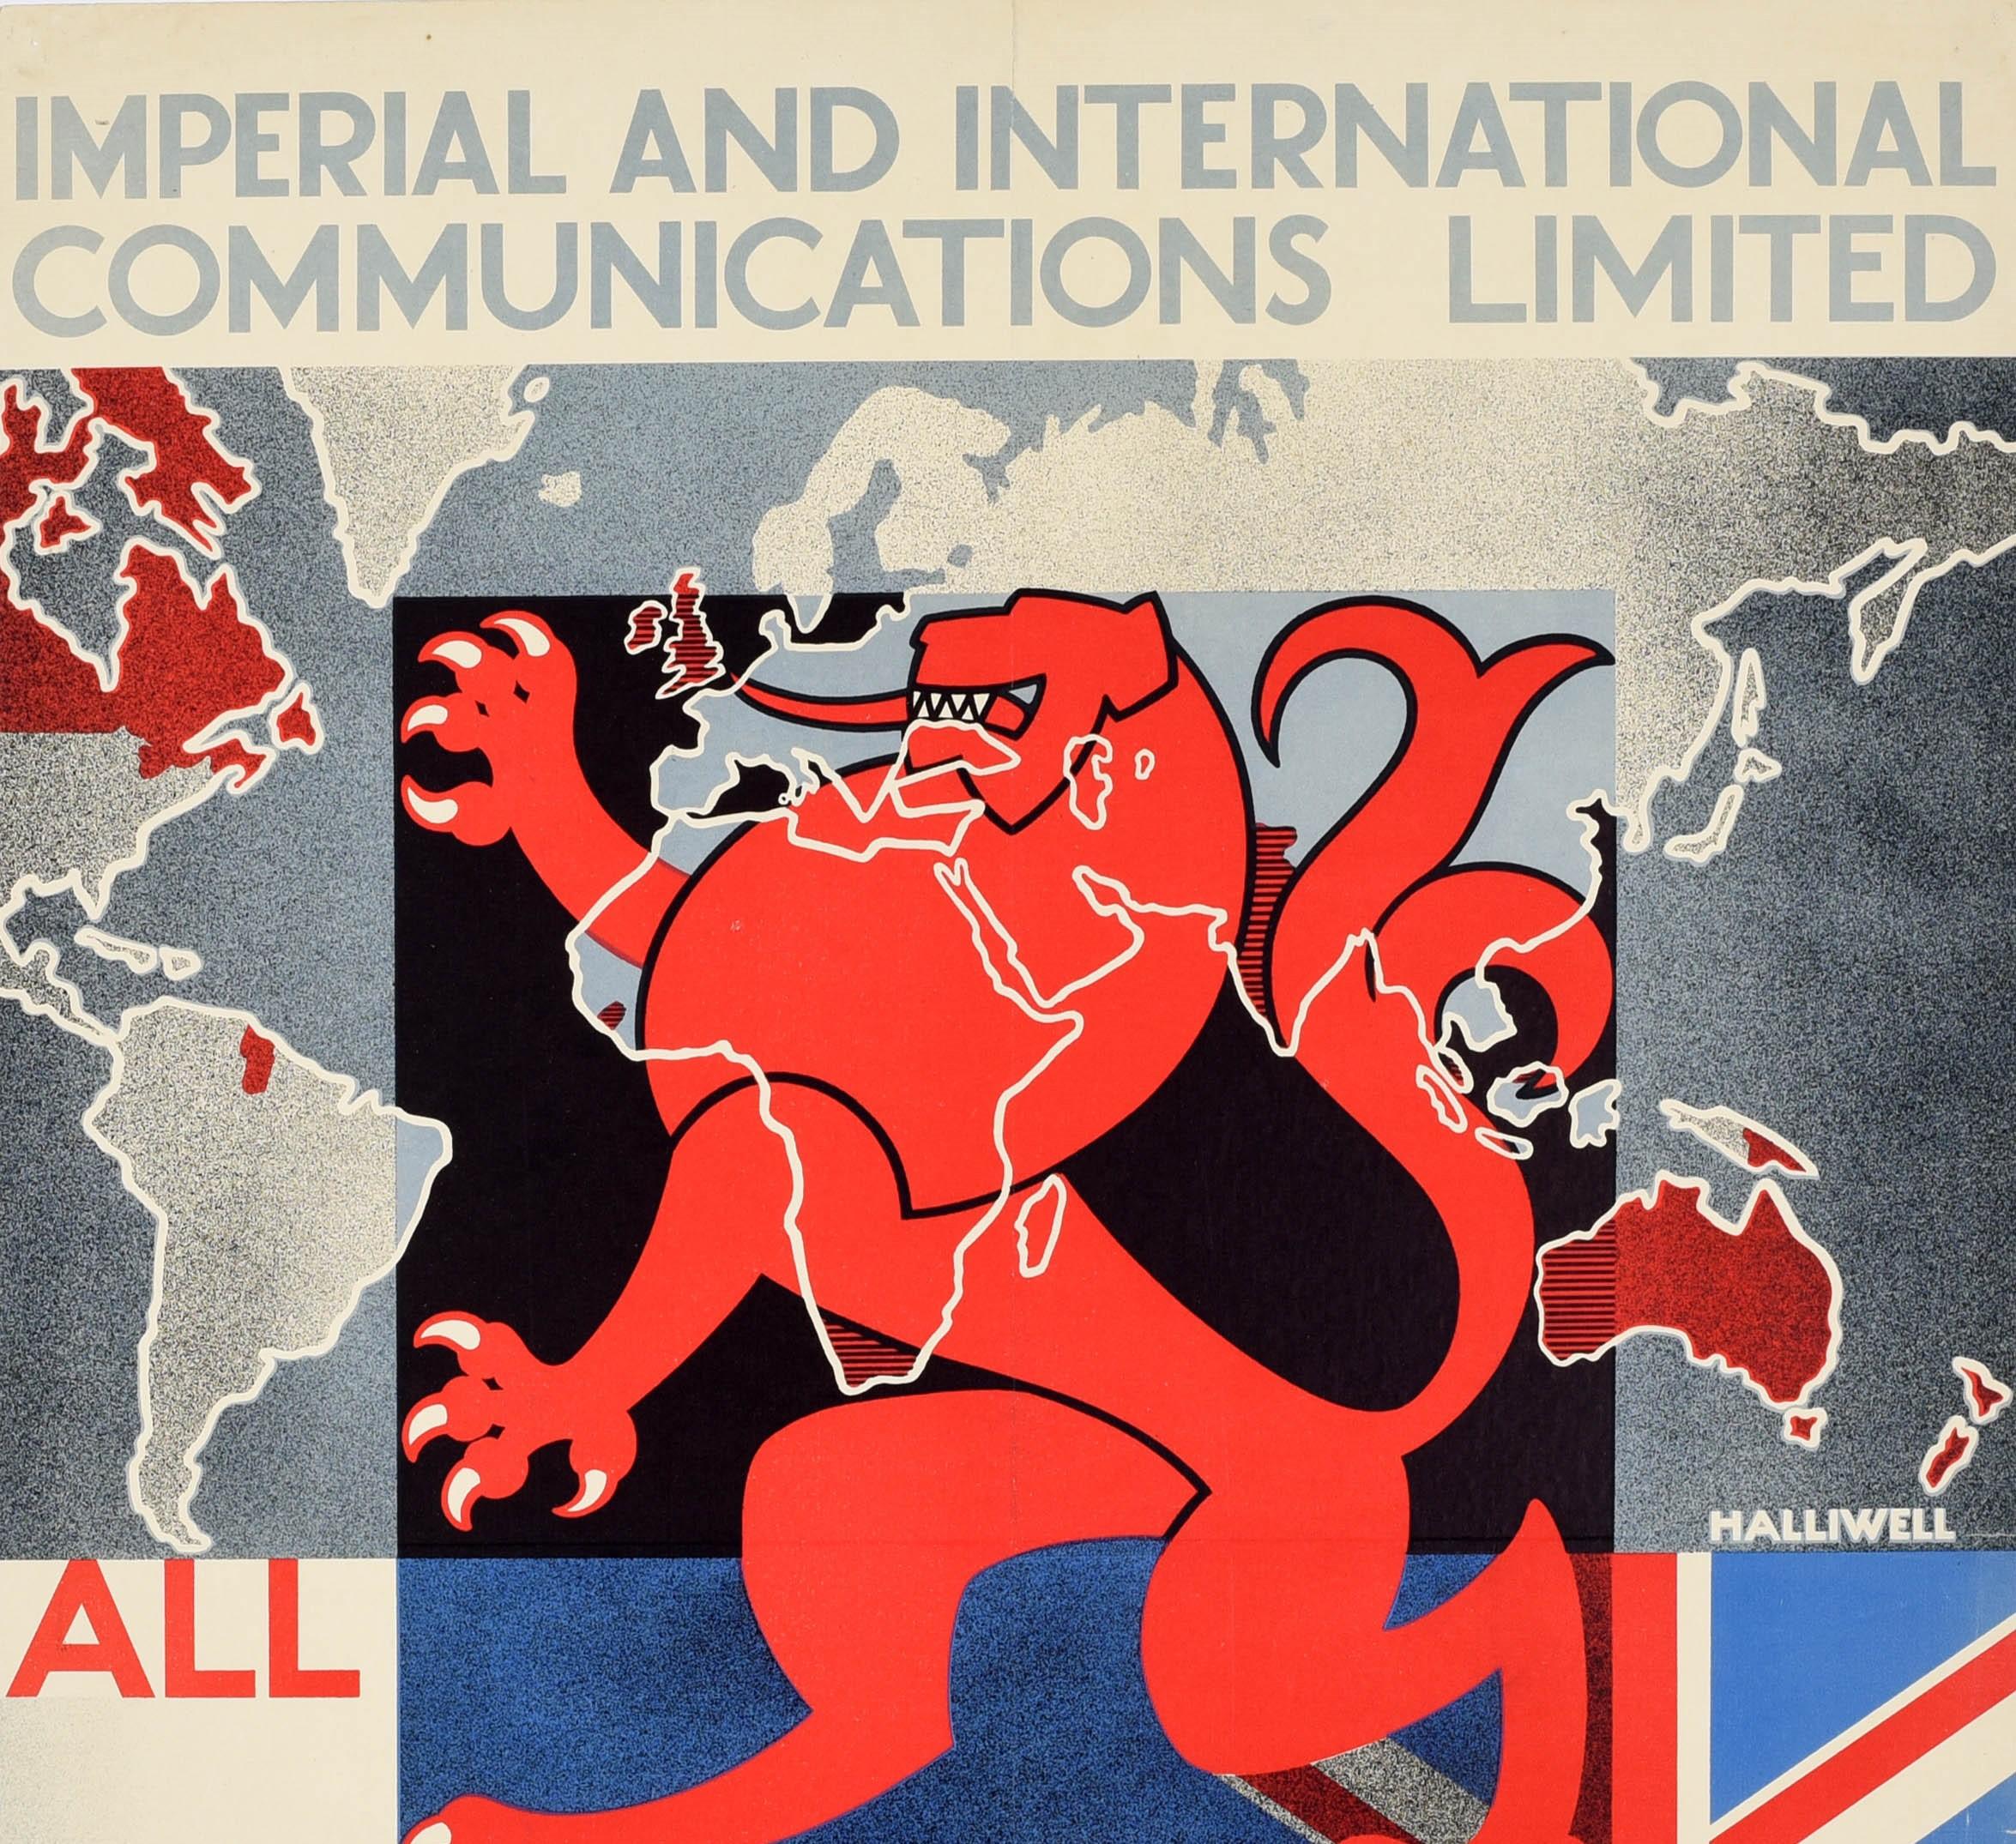 Original Vintage Poster Imperial Eastern Marconi Communications British Industry - Print by A.E. Halliwell